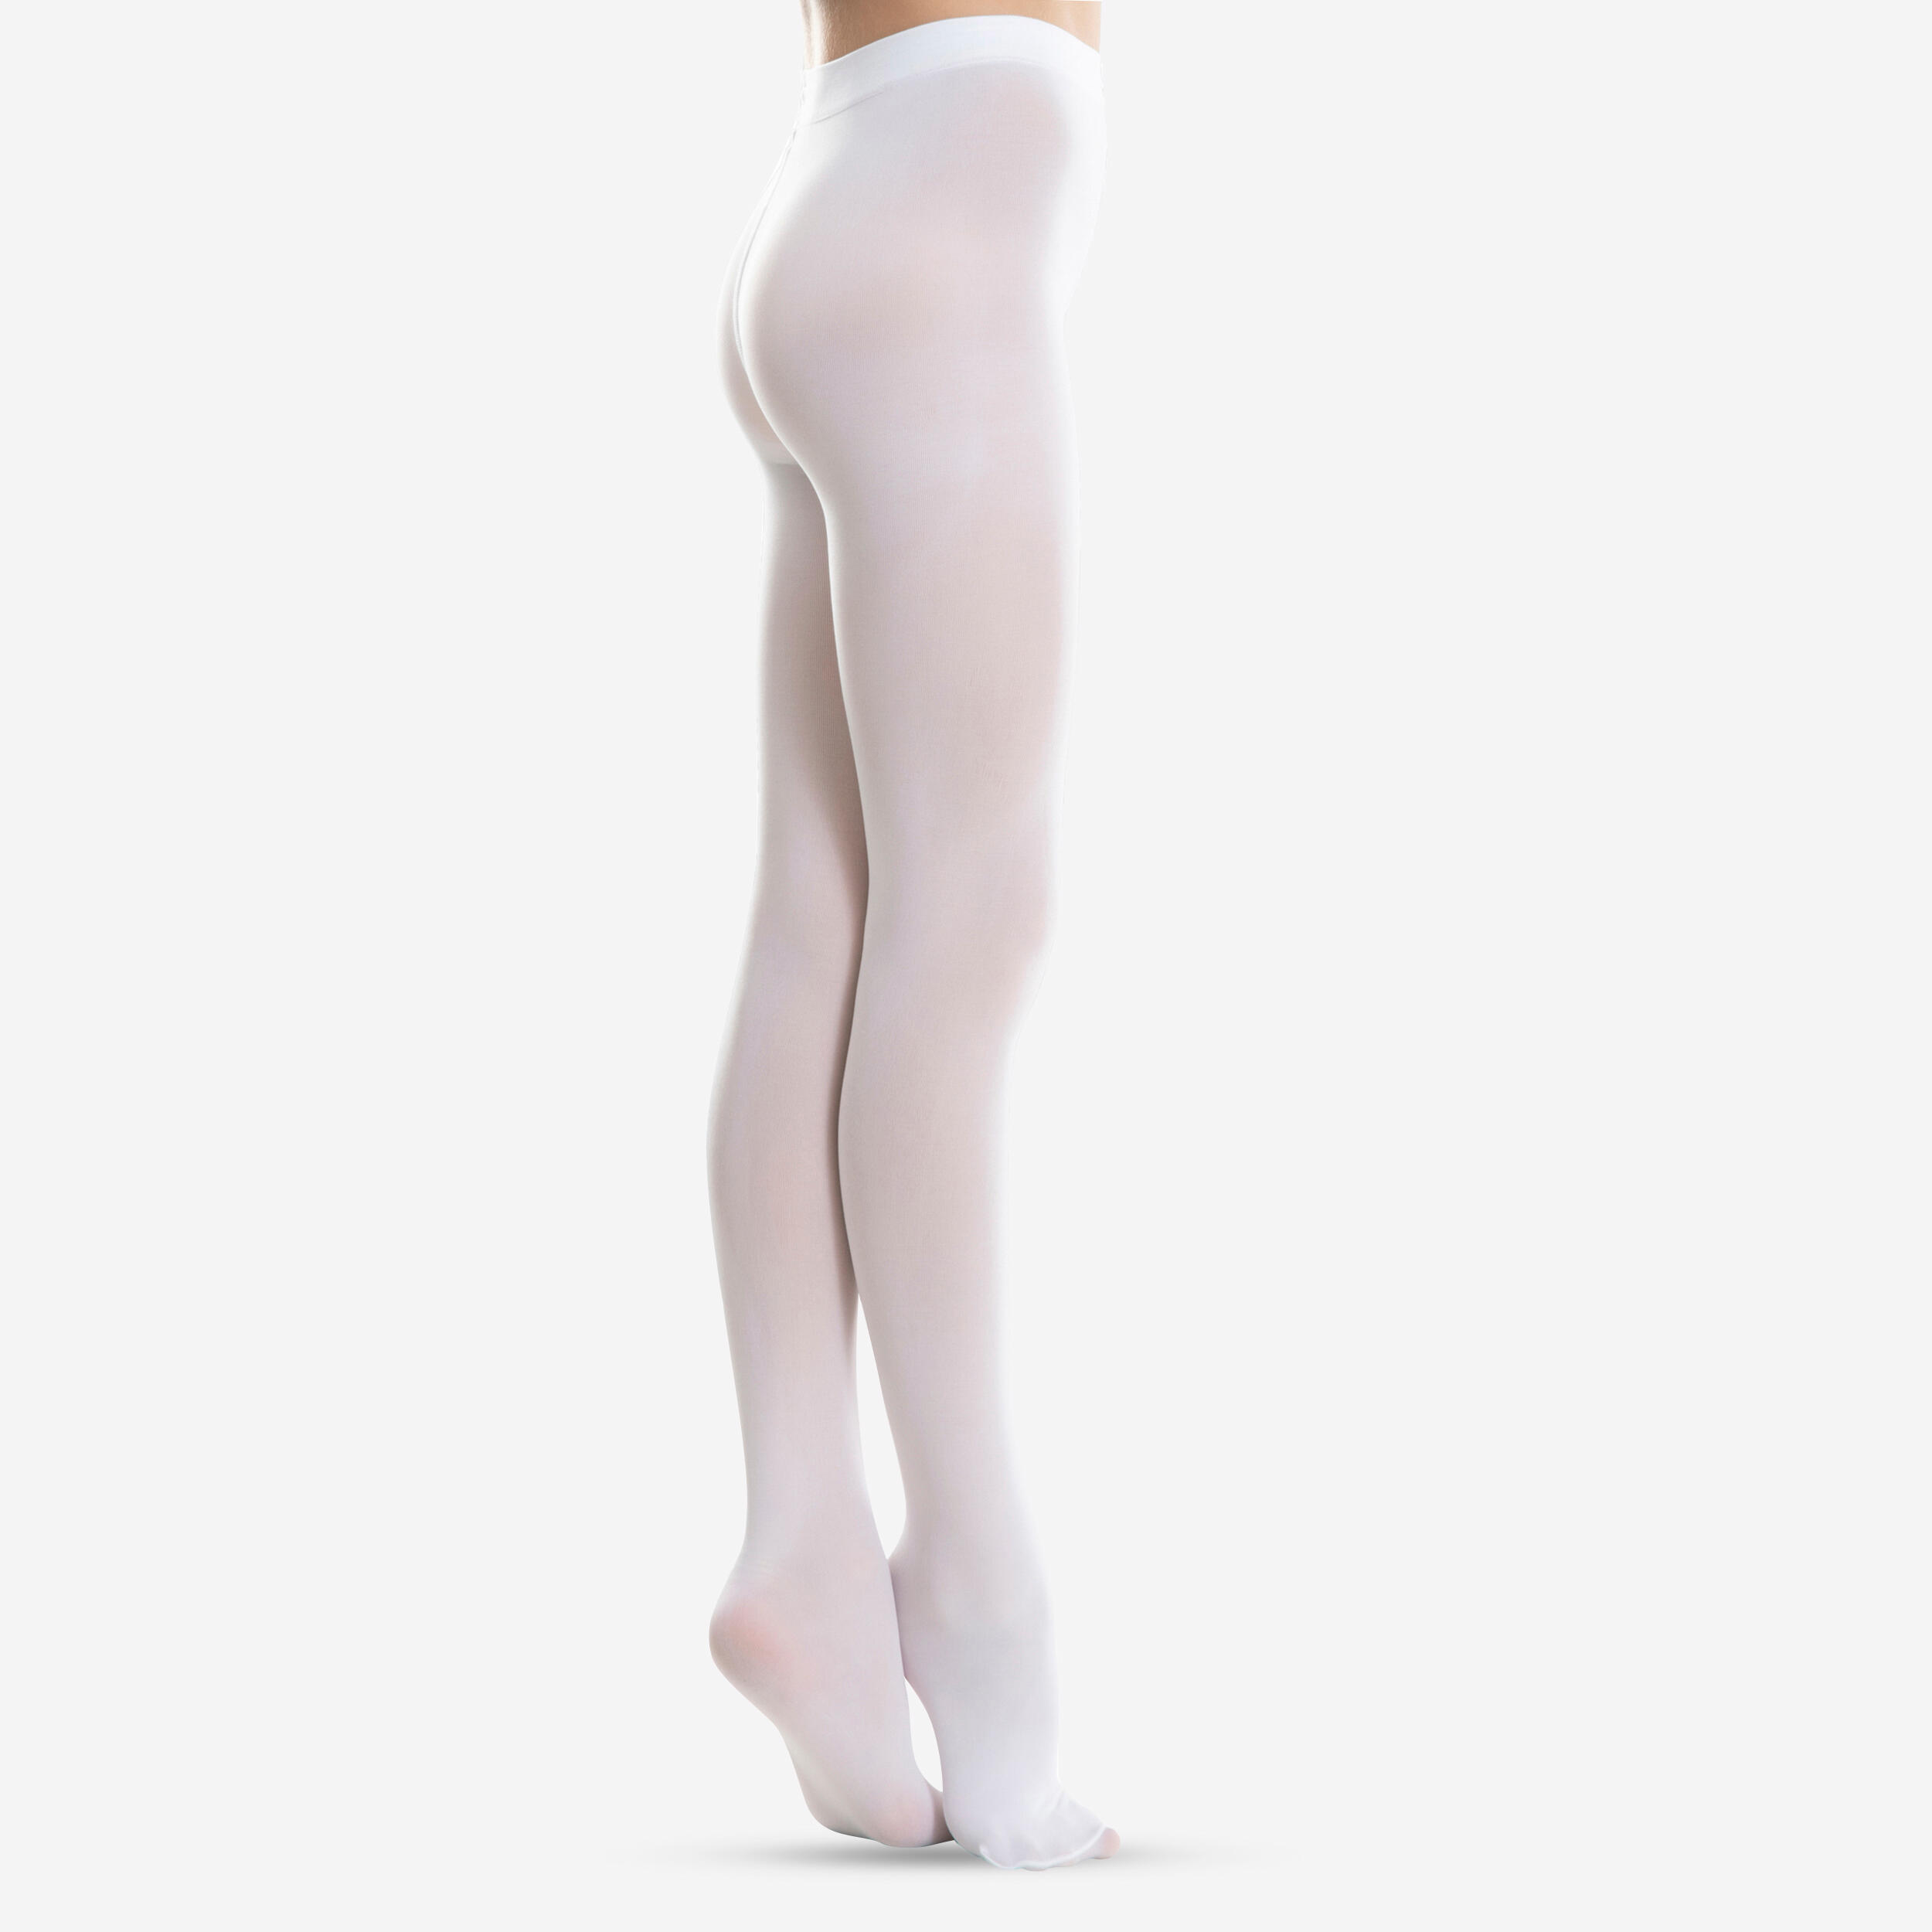 Body Wrapper Full body tights? Are they Supportive? : r/BALLET